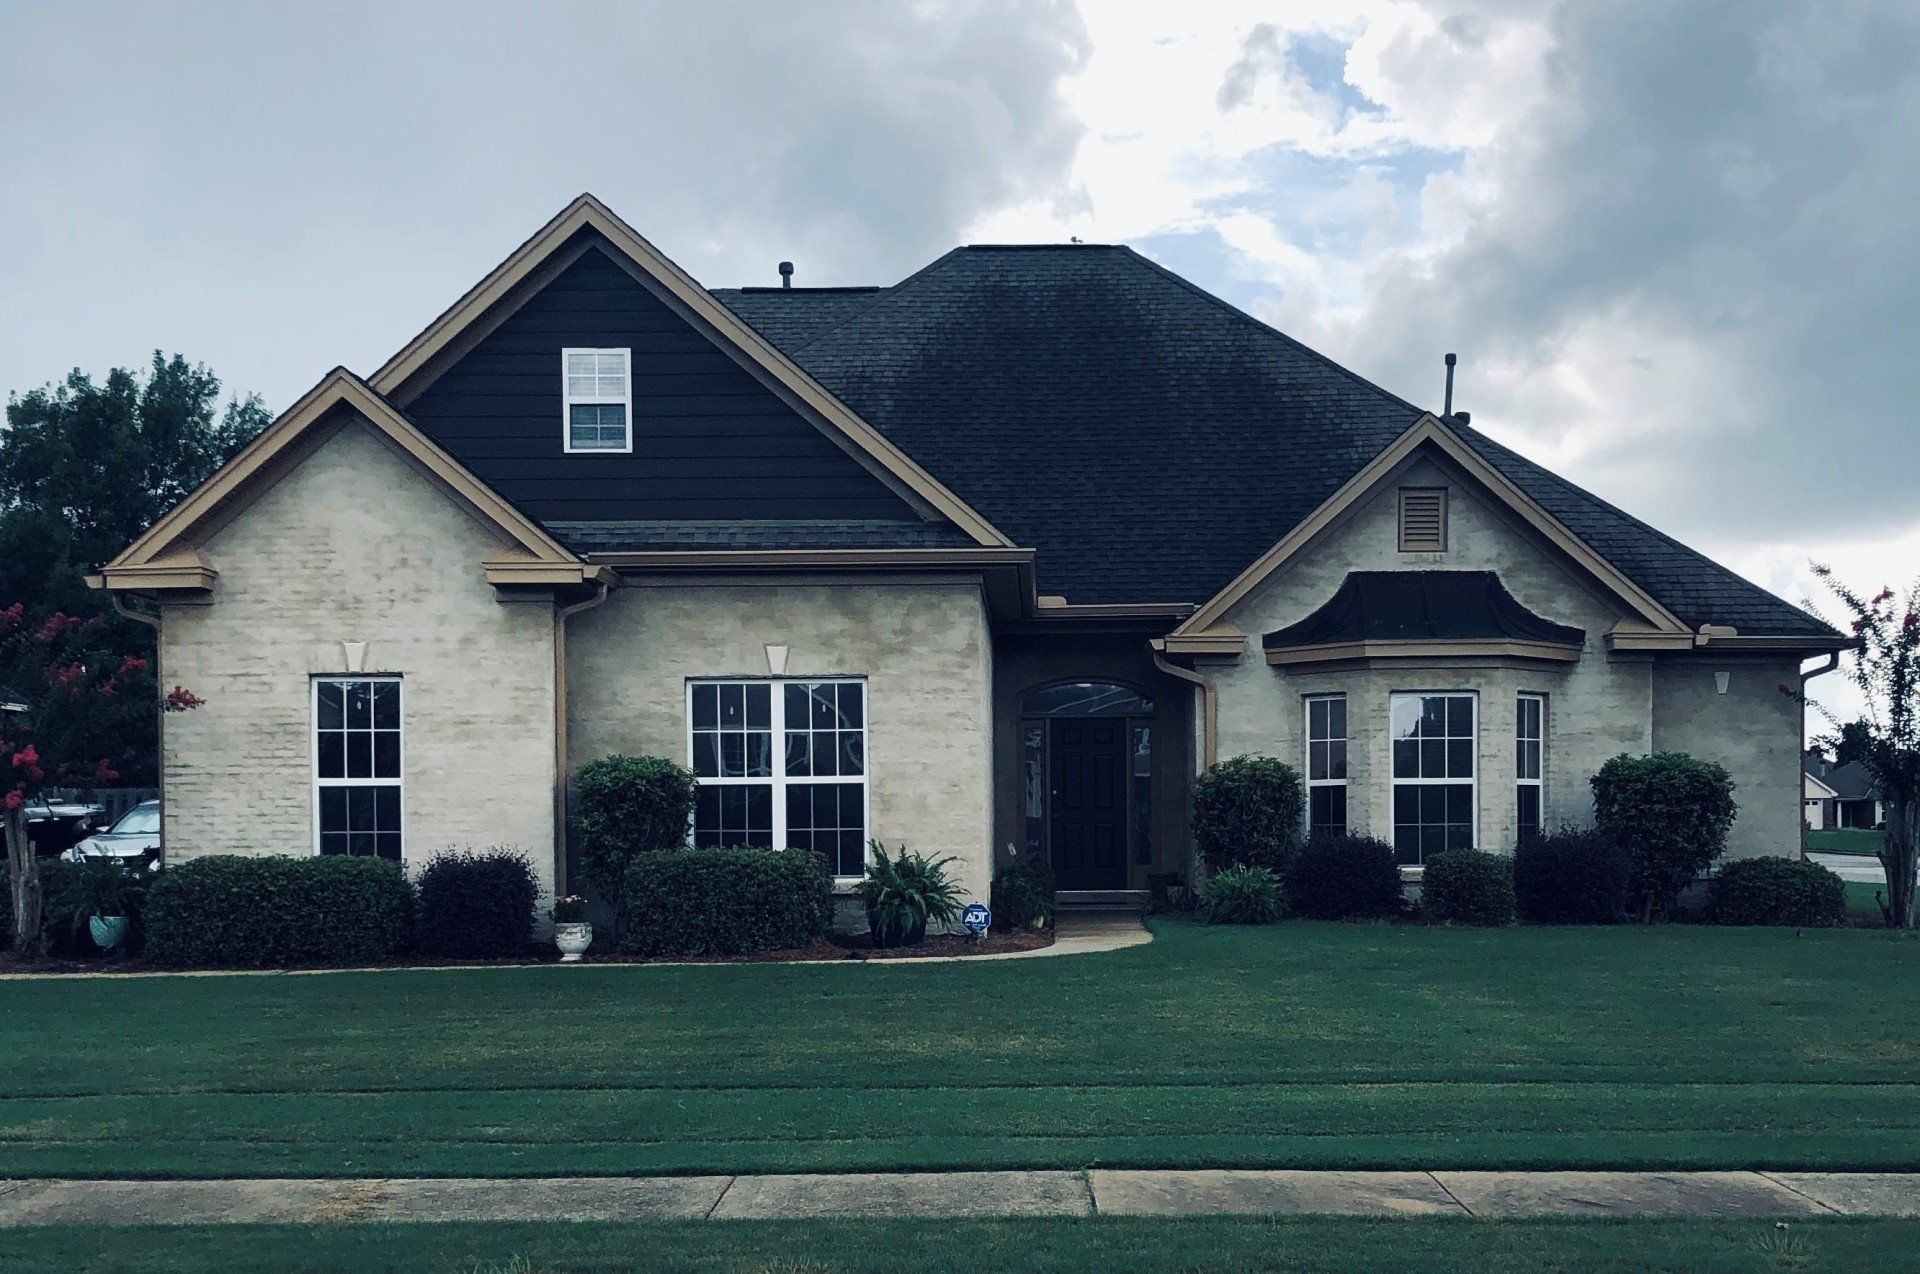 home window tint in Deer Creek AL - After SPF Tint on 7/29/2020. The climate is controlled and the perfect lighting filters into this home in Deer Creek, AL